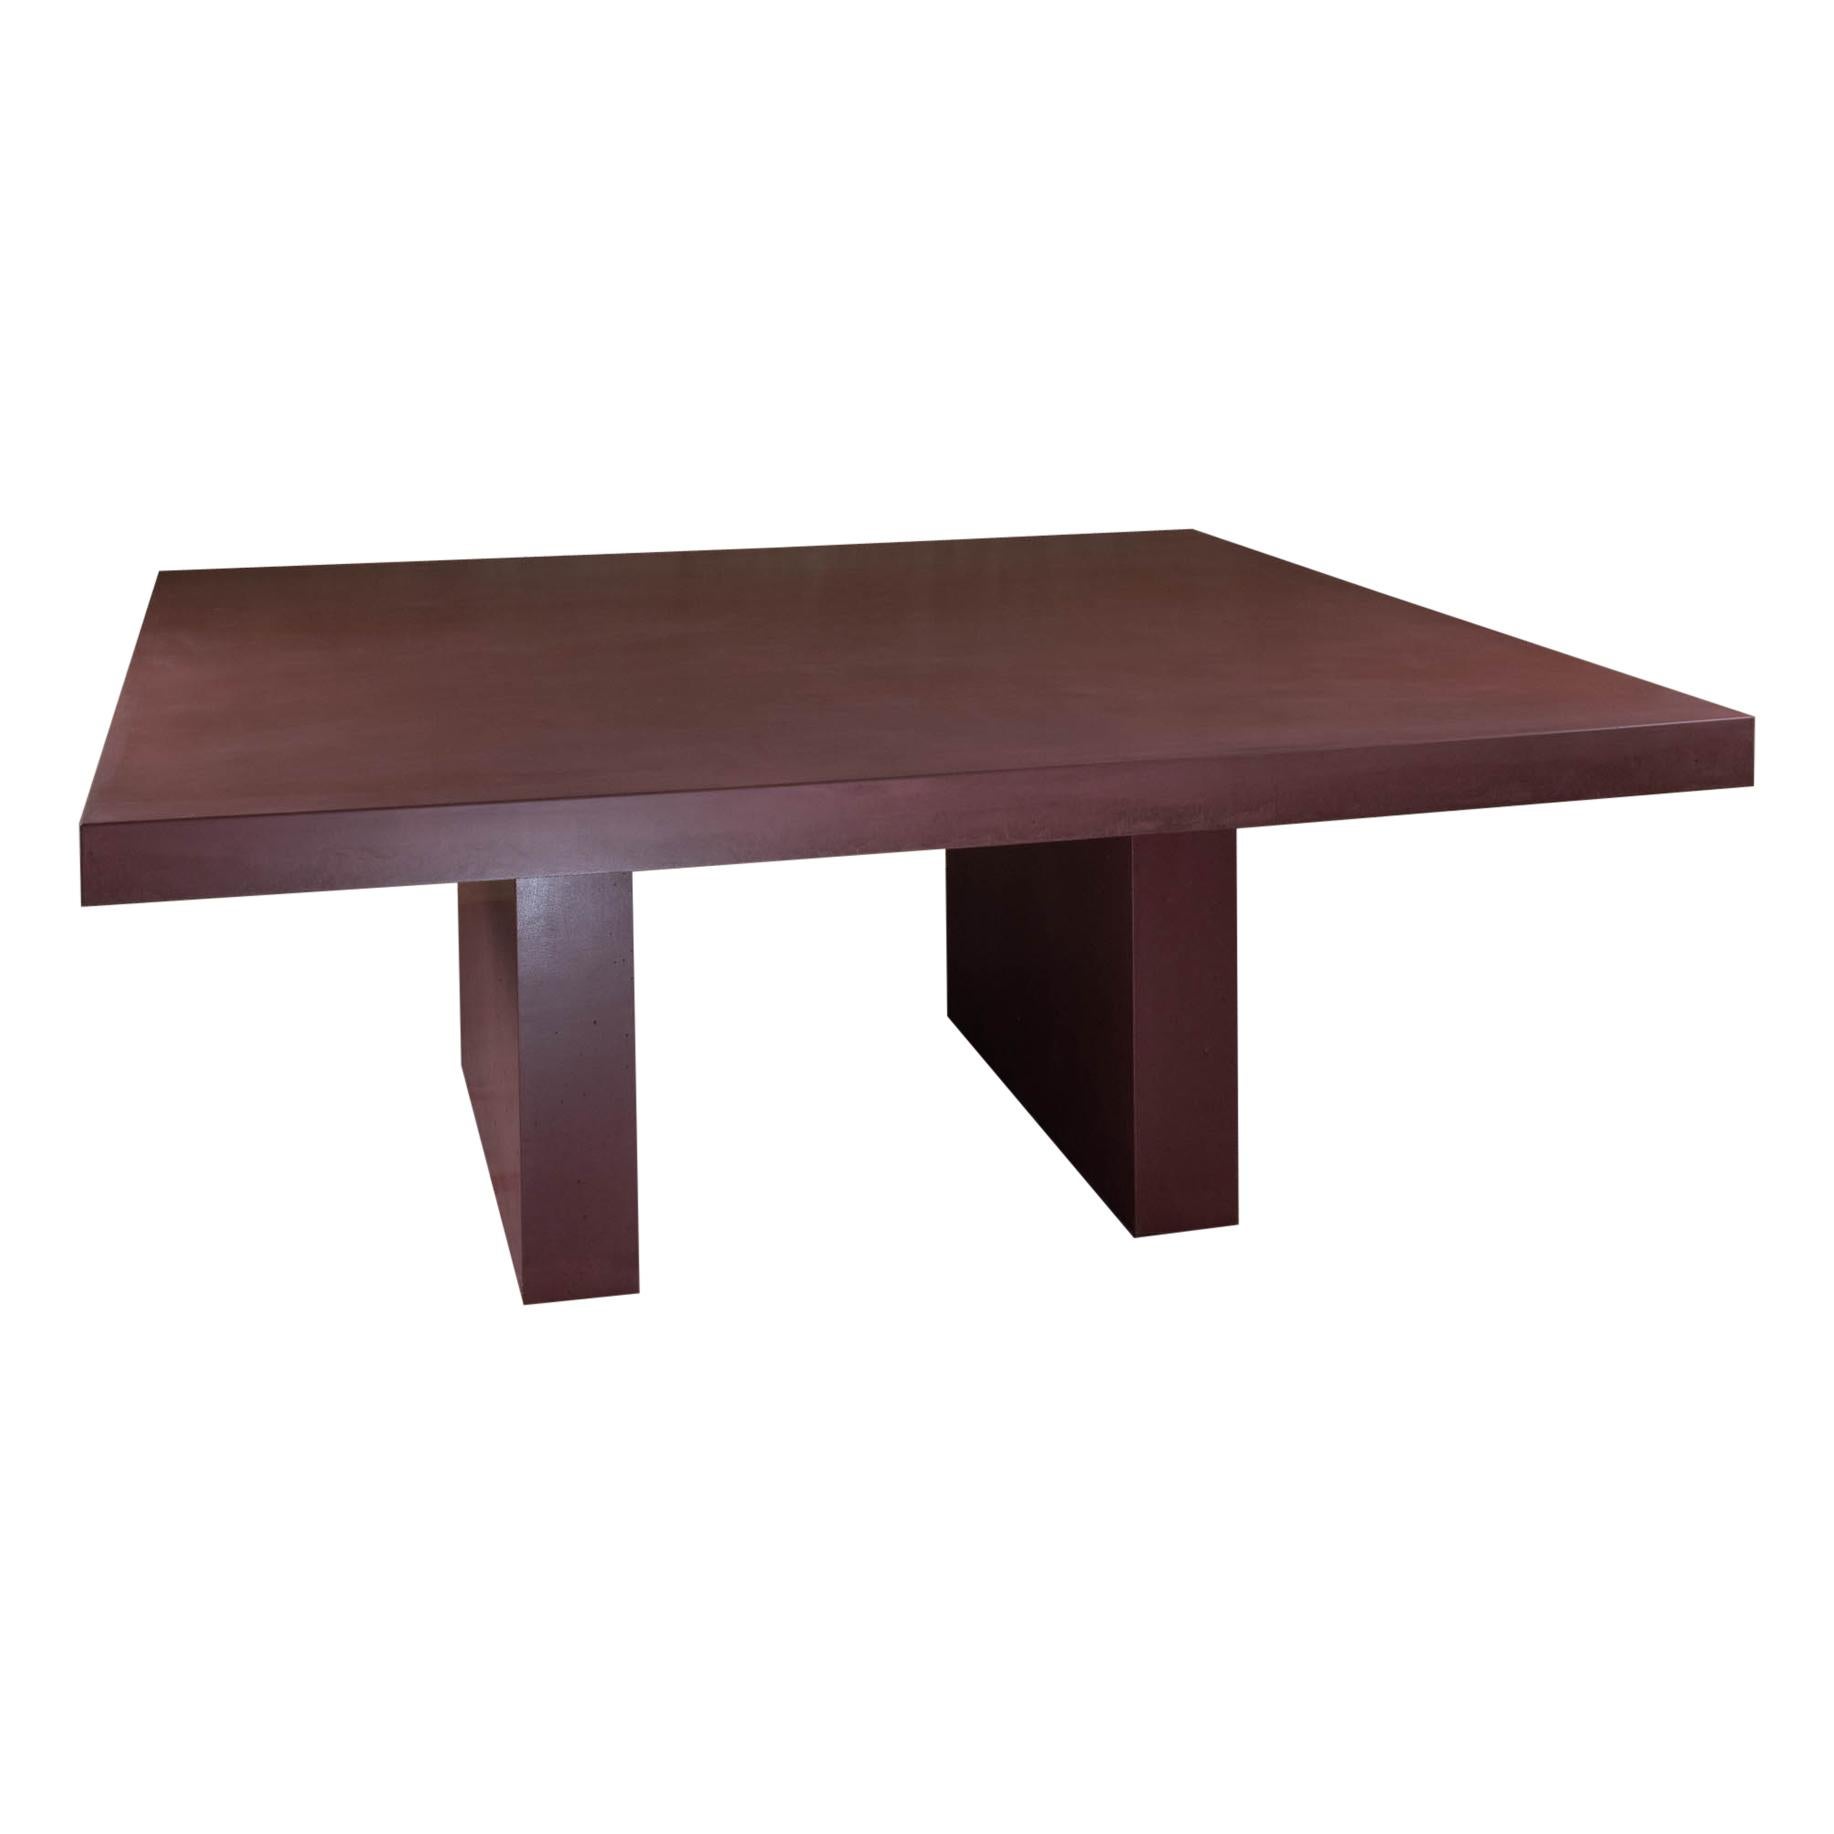 21st Century Giorgione 180, Red Concrete Dining Table, 100% Handcrafted in Italy